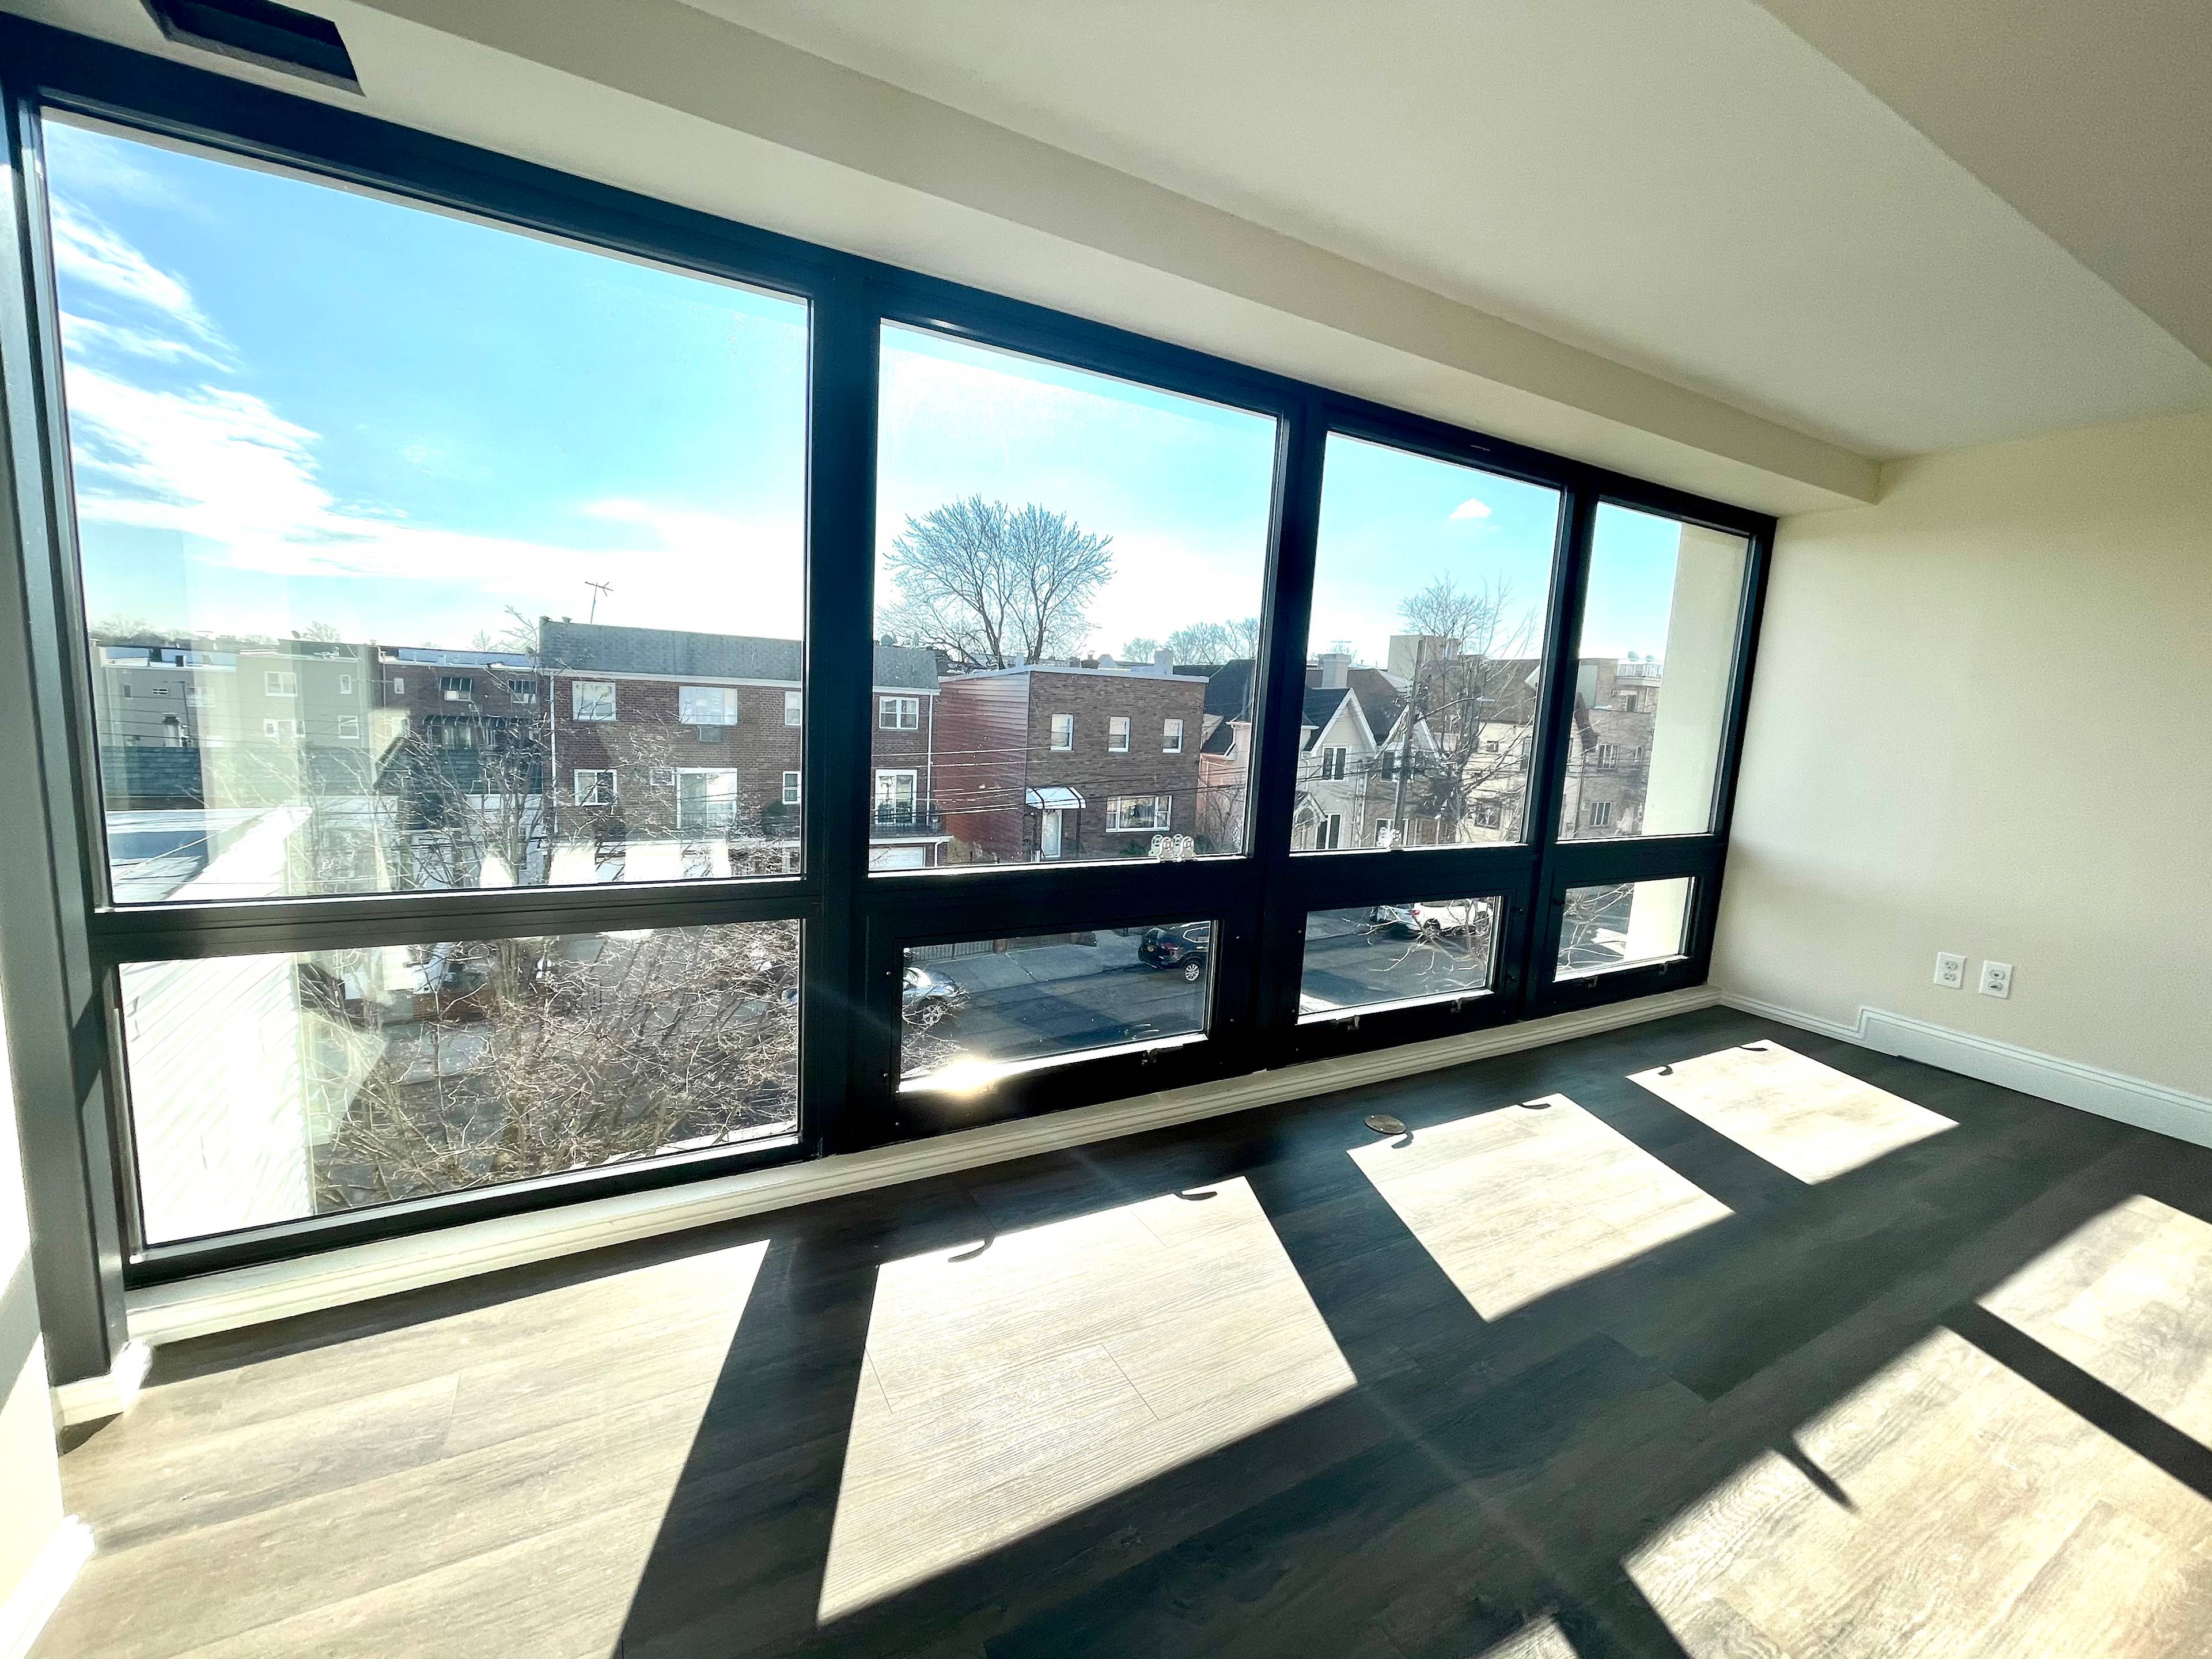 Brand New Building. Luxury 2Bed 2Bath In a beautiful block of Astoria Ditmars BLVD on 42nd Street.